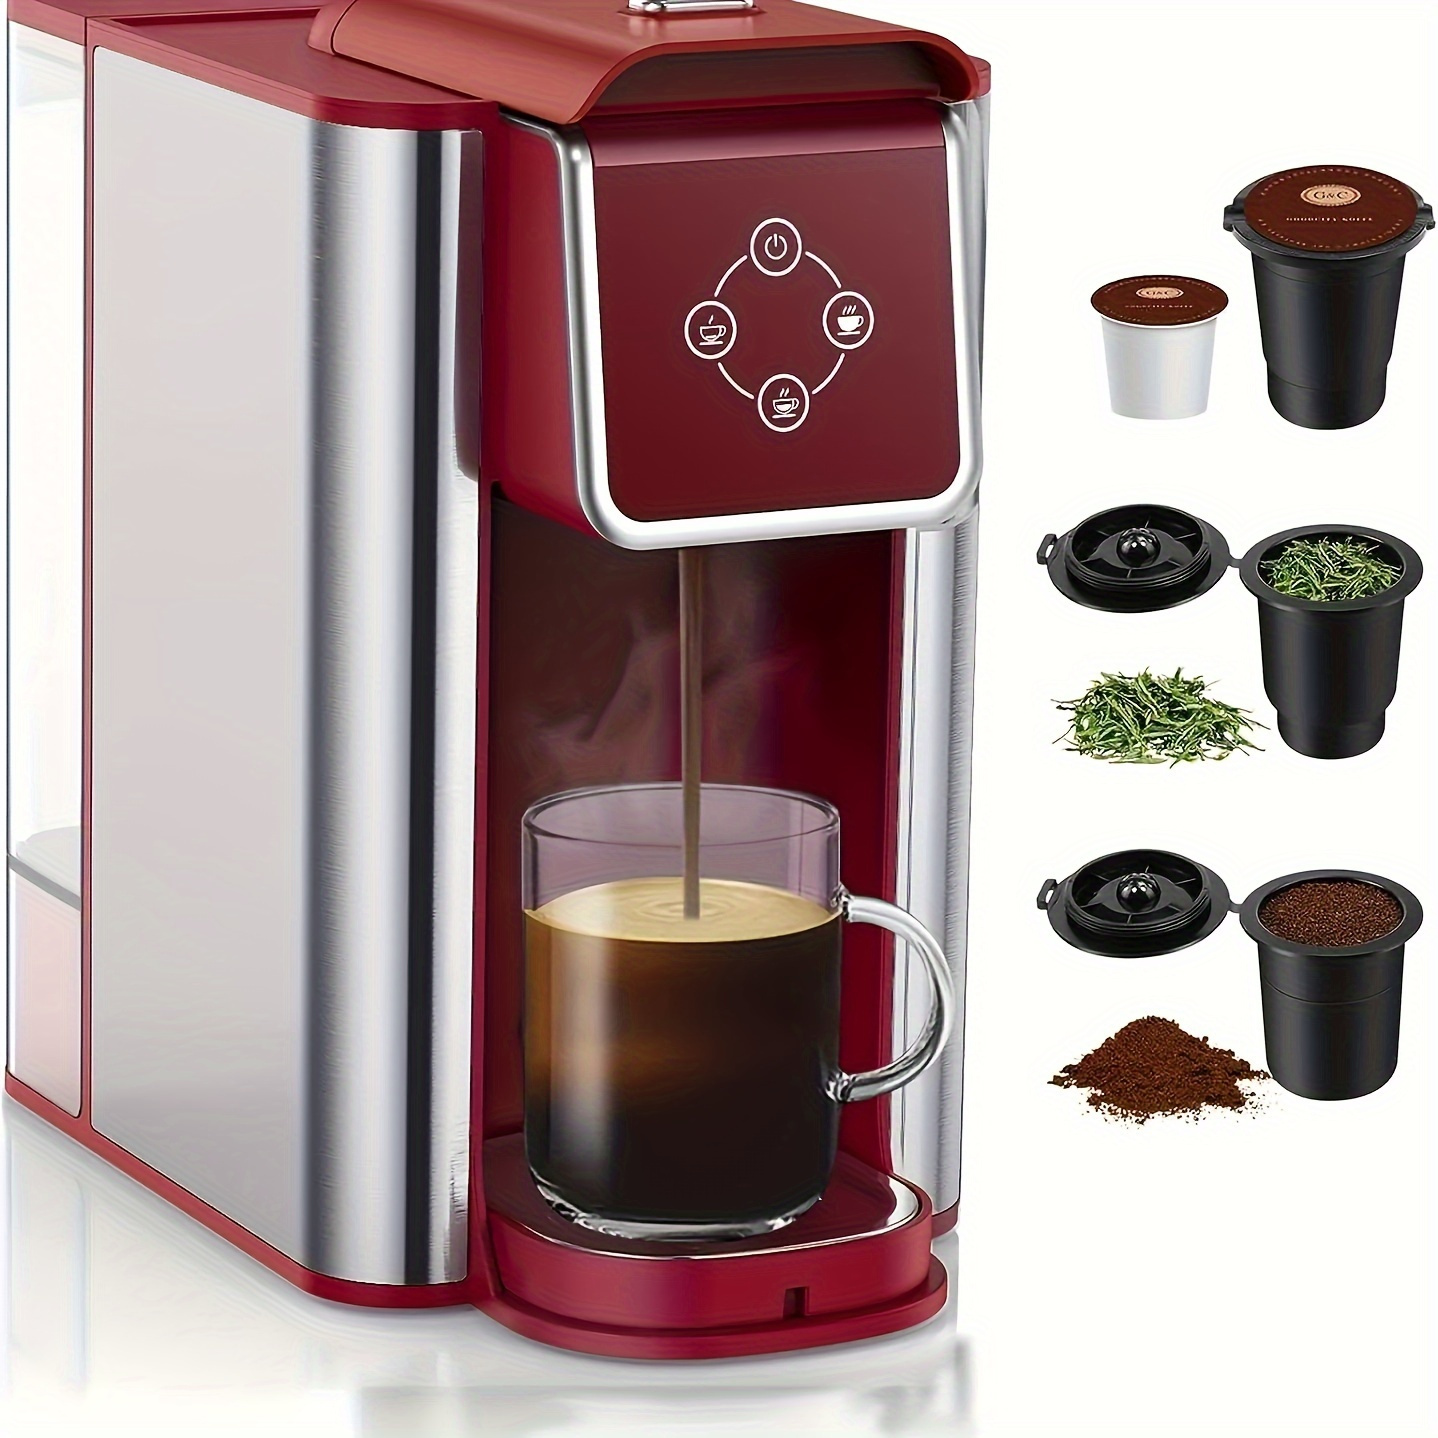 

1pc, Sifene Coffee Maker, 3 In 1 Single Serve Coffee Machine, Pod Coffee Maker For K-cup Capsule Pod, Ground Coffee Brewer, Leaf Tea Maker, 6 To 10 Ounce Cup, Removable 50 Oz Water Reservoir Red